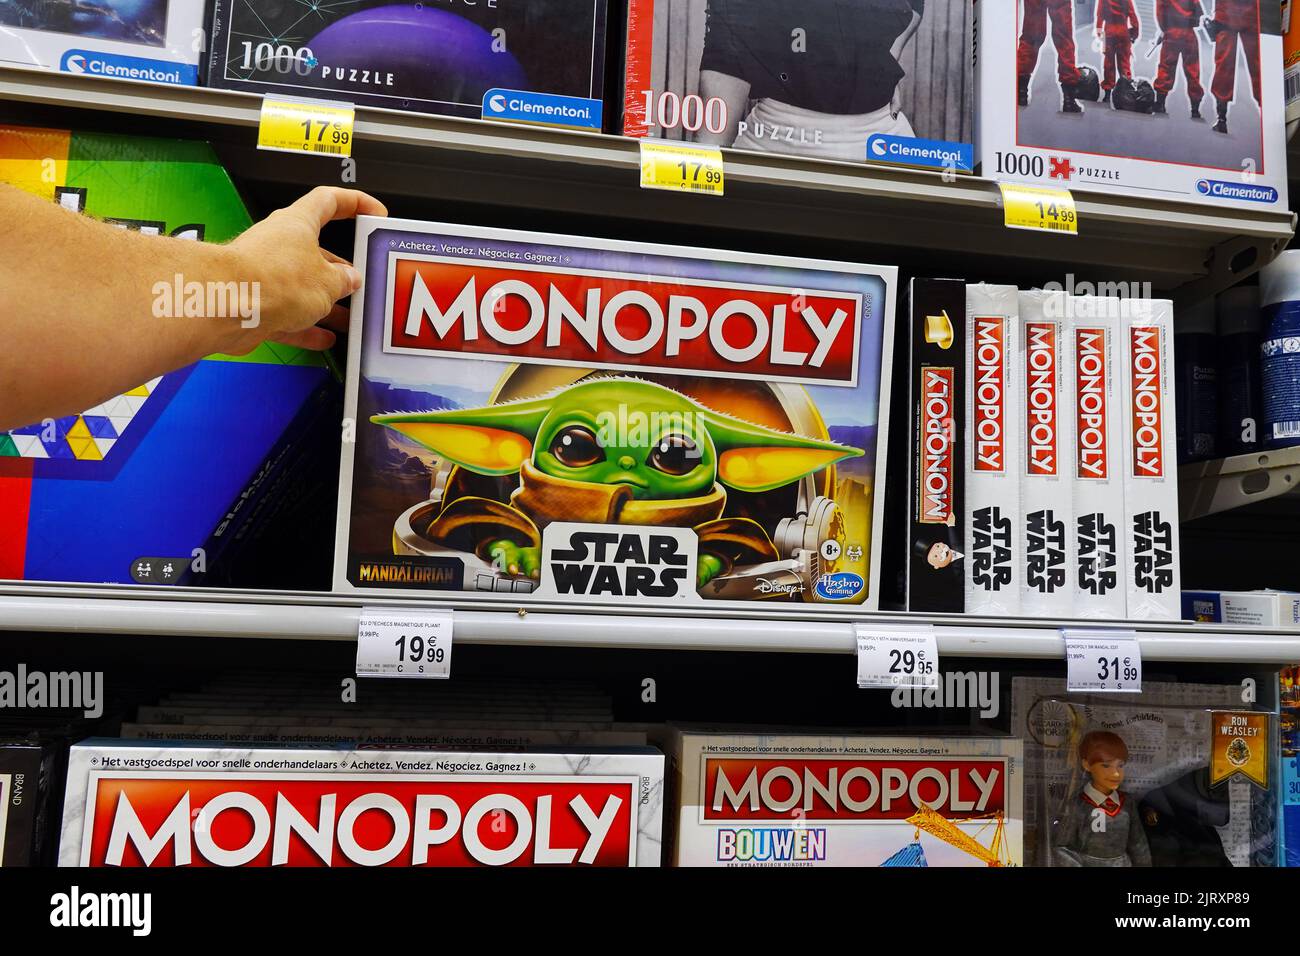 Monopoly board games in a store Stock Photo